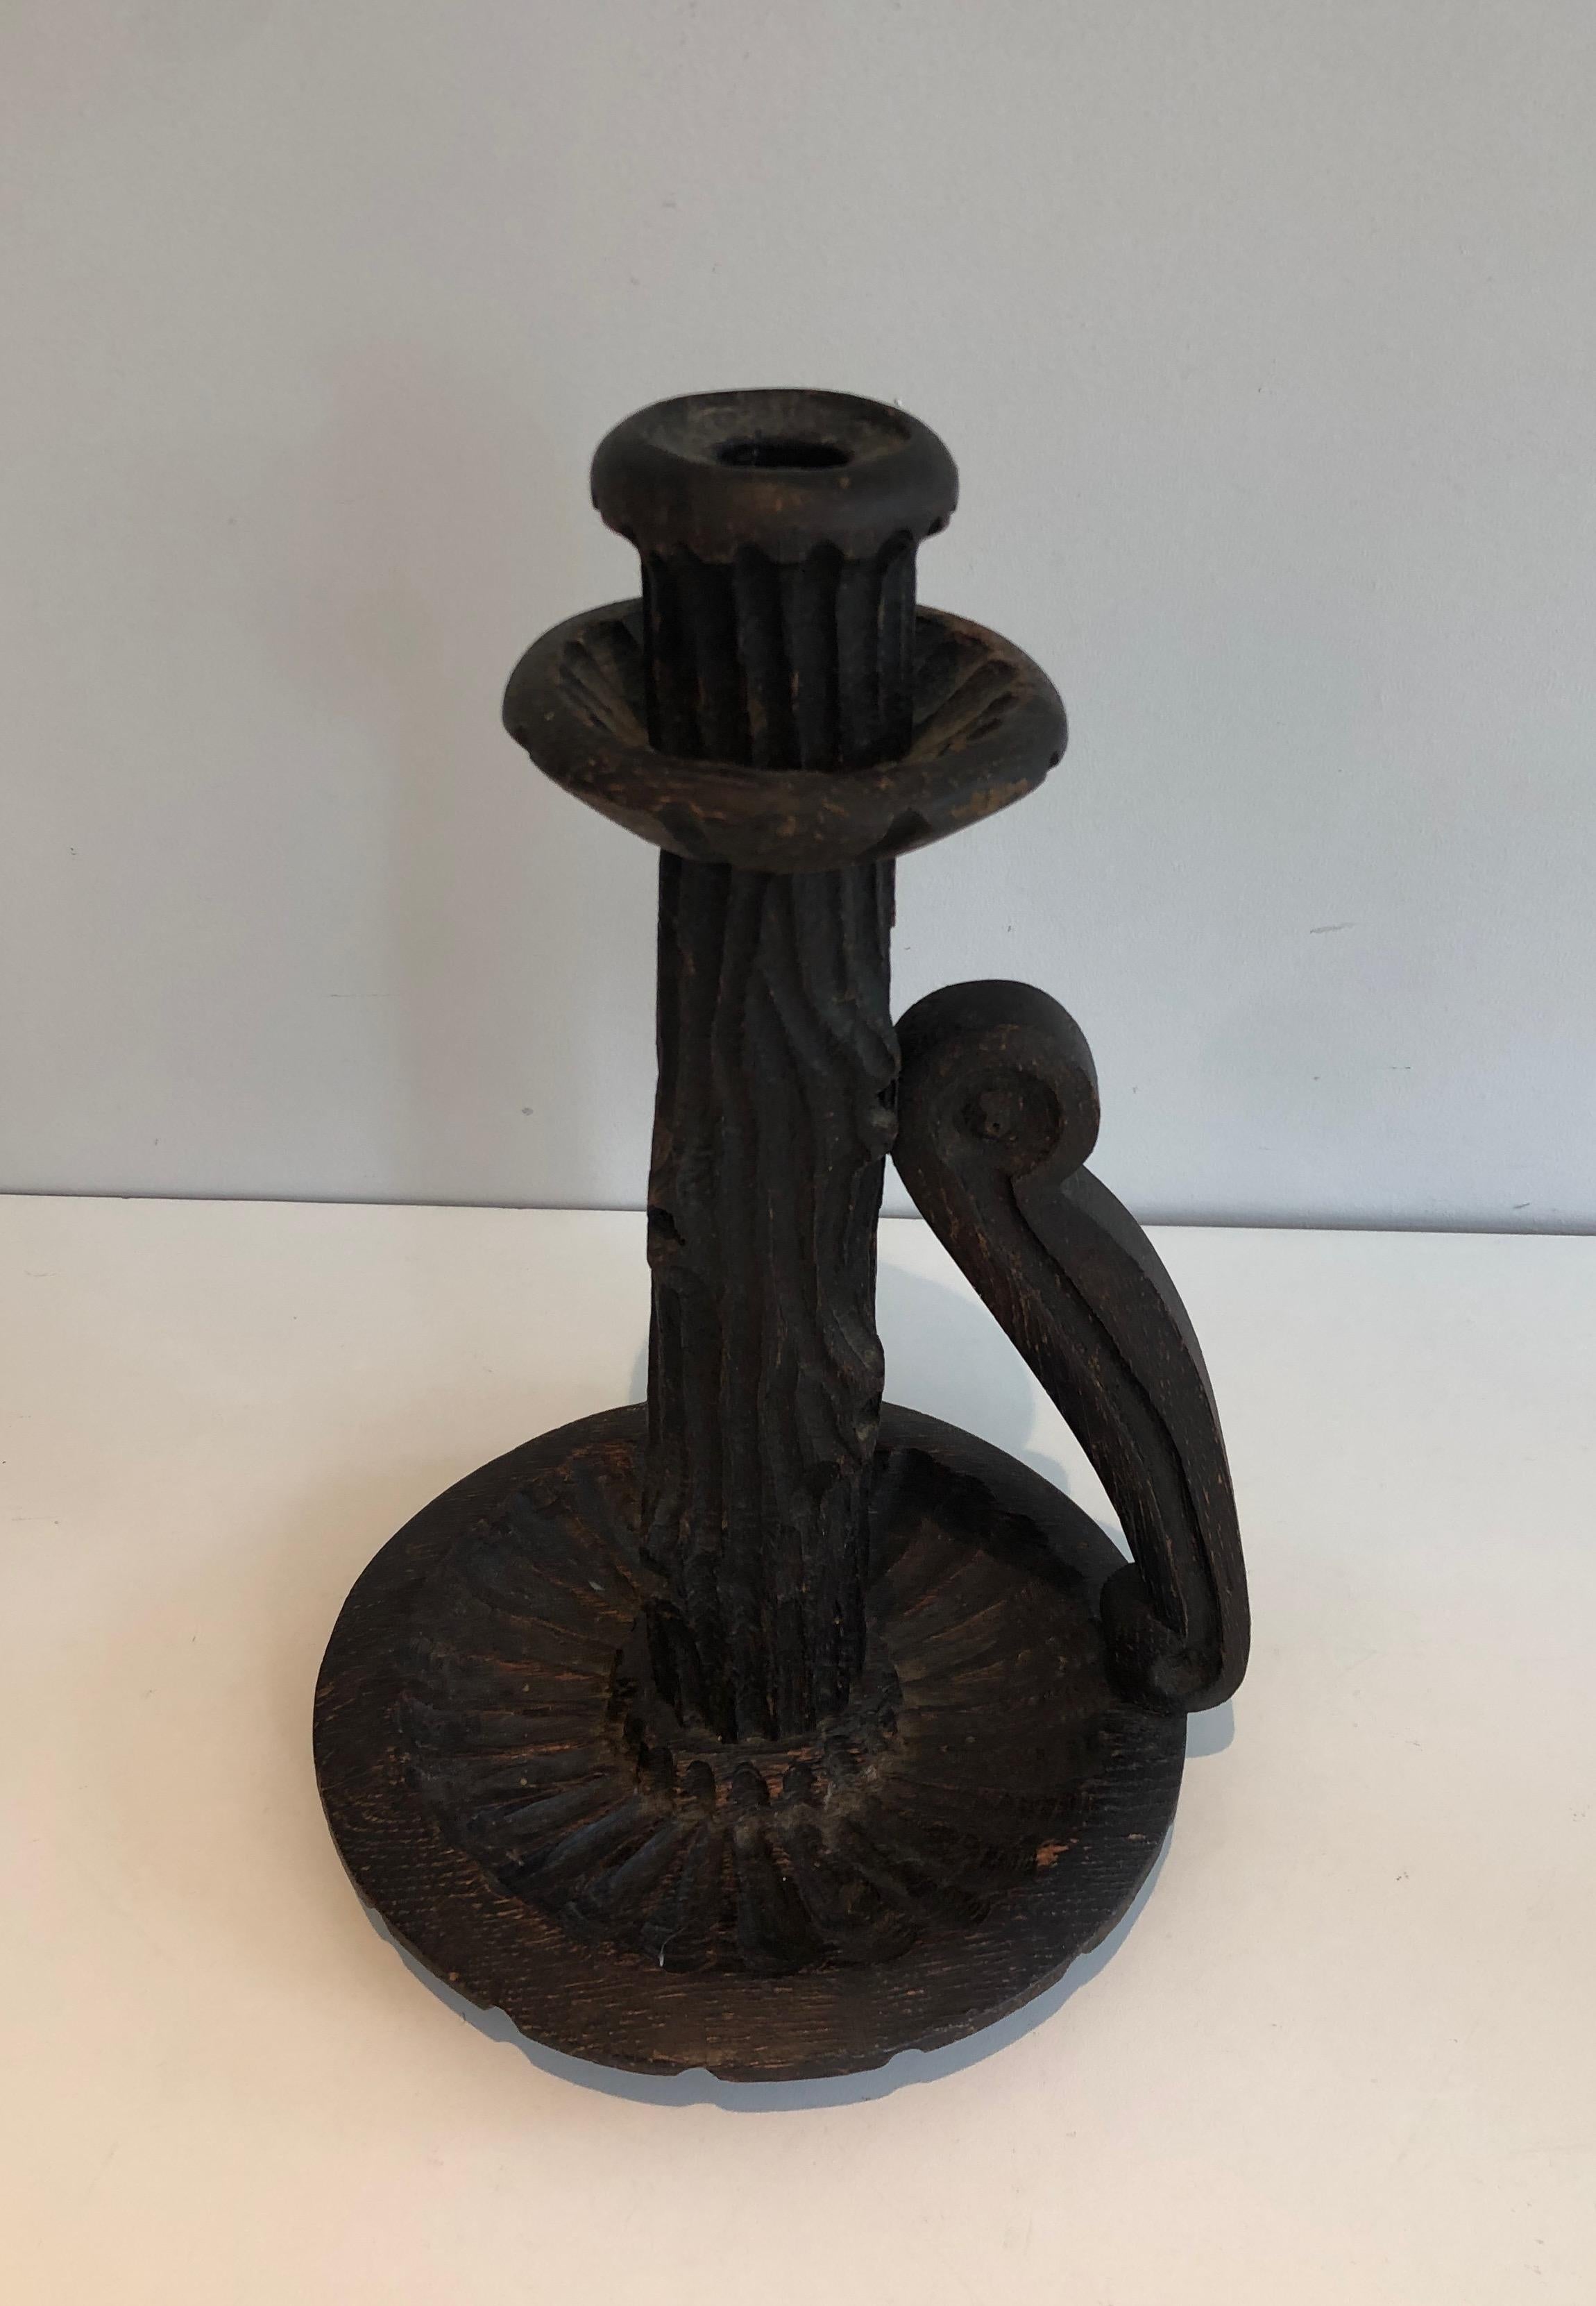 Pair of Tall Brutalist Candle Holders Made of Carved Wood, French, circa 1950 For Sale 9